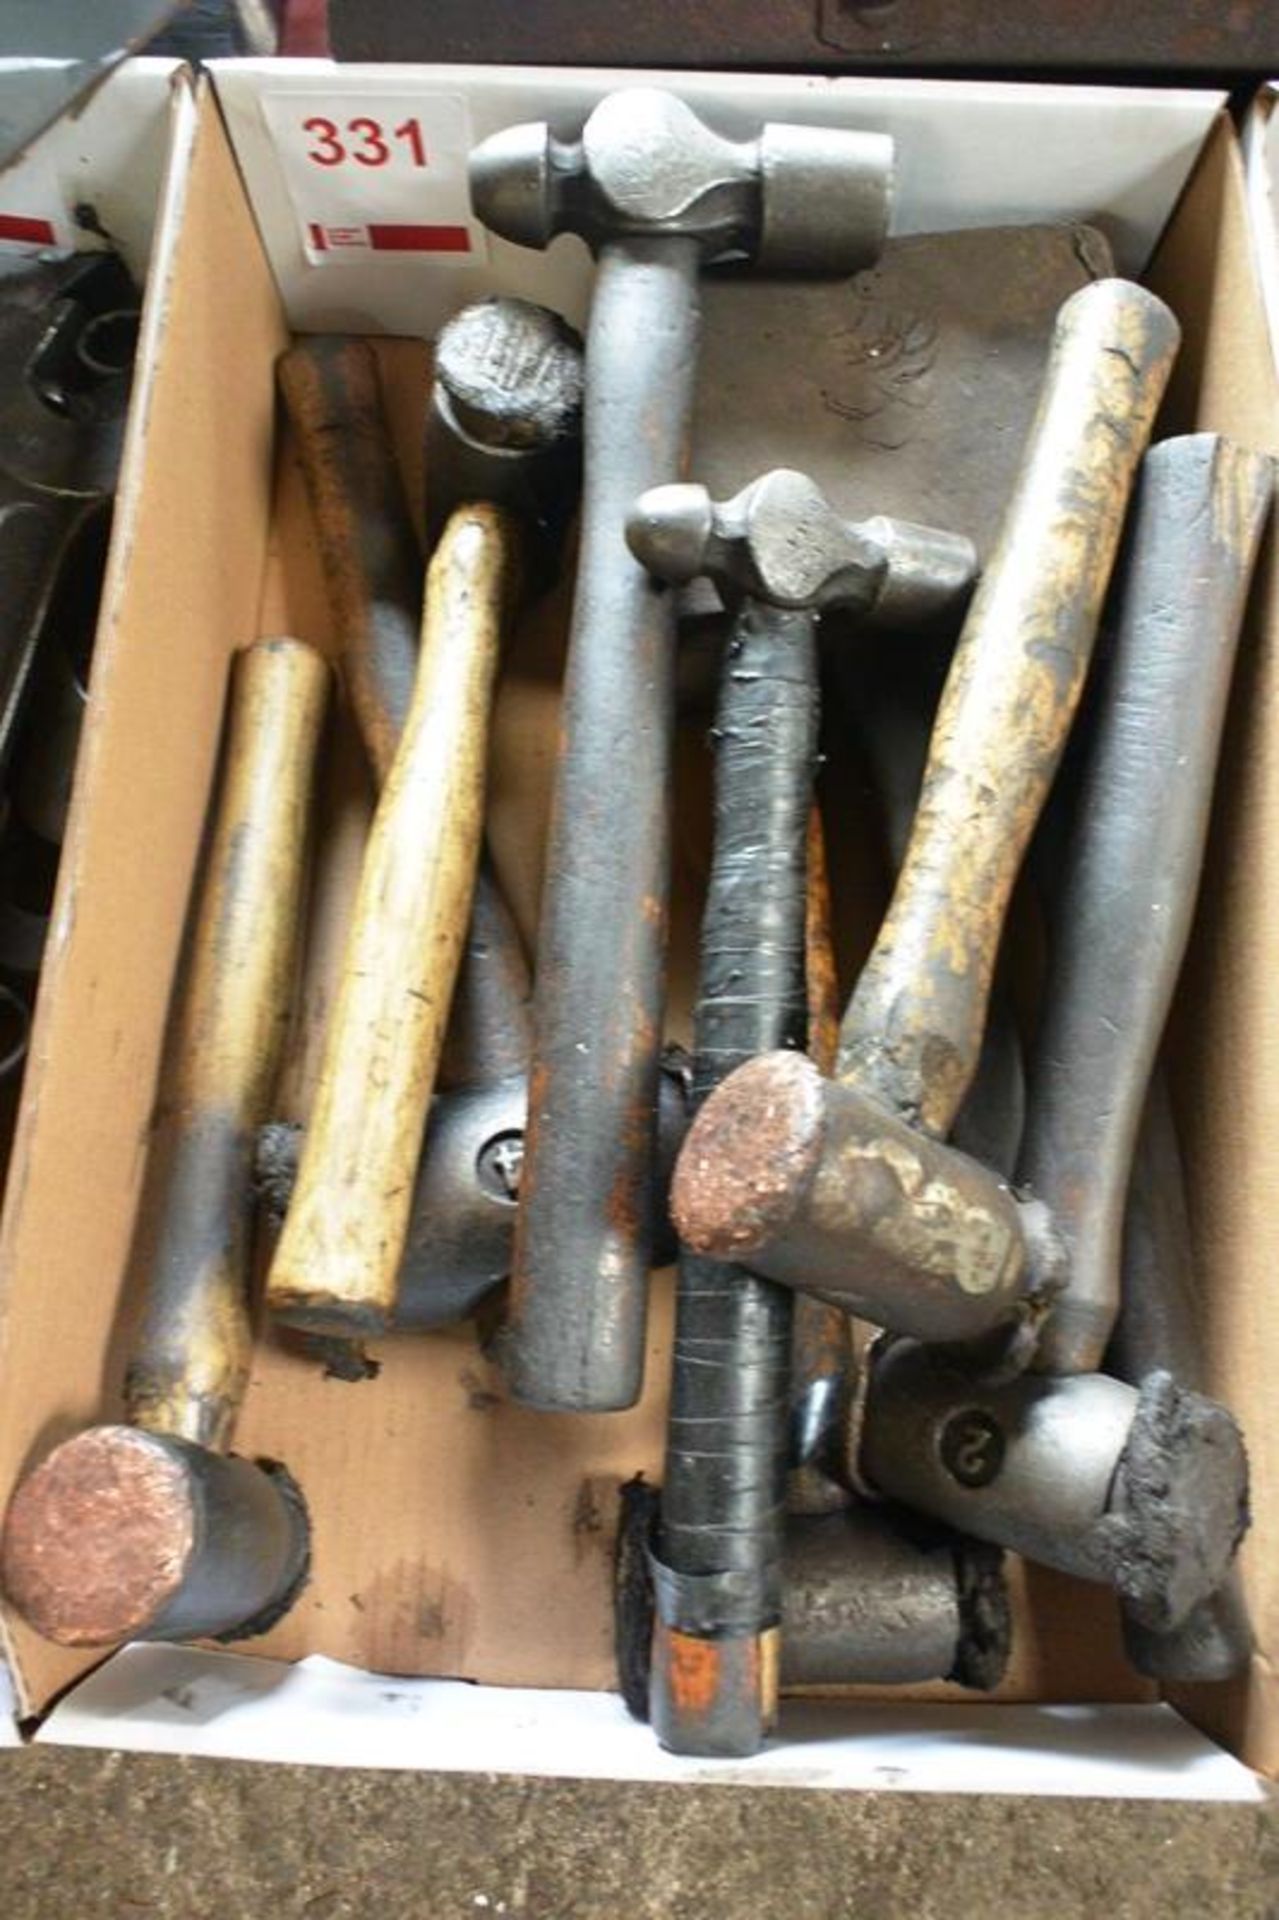 Assorted hammers (Recommended collection period for this lot Wednesday 15th - Friday 17th